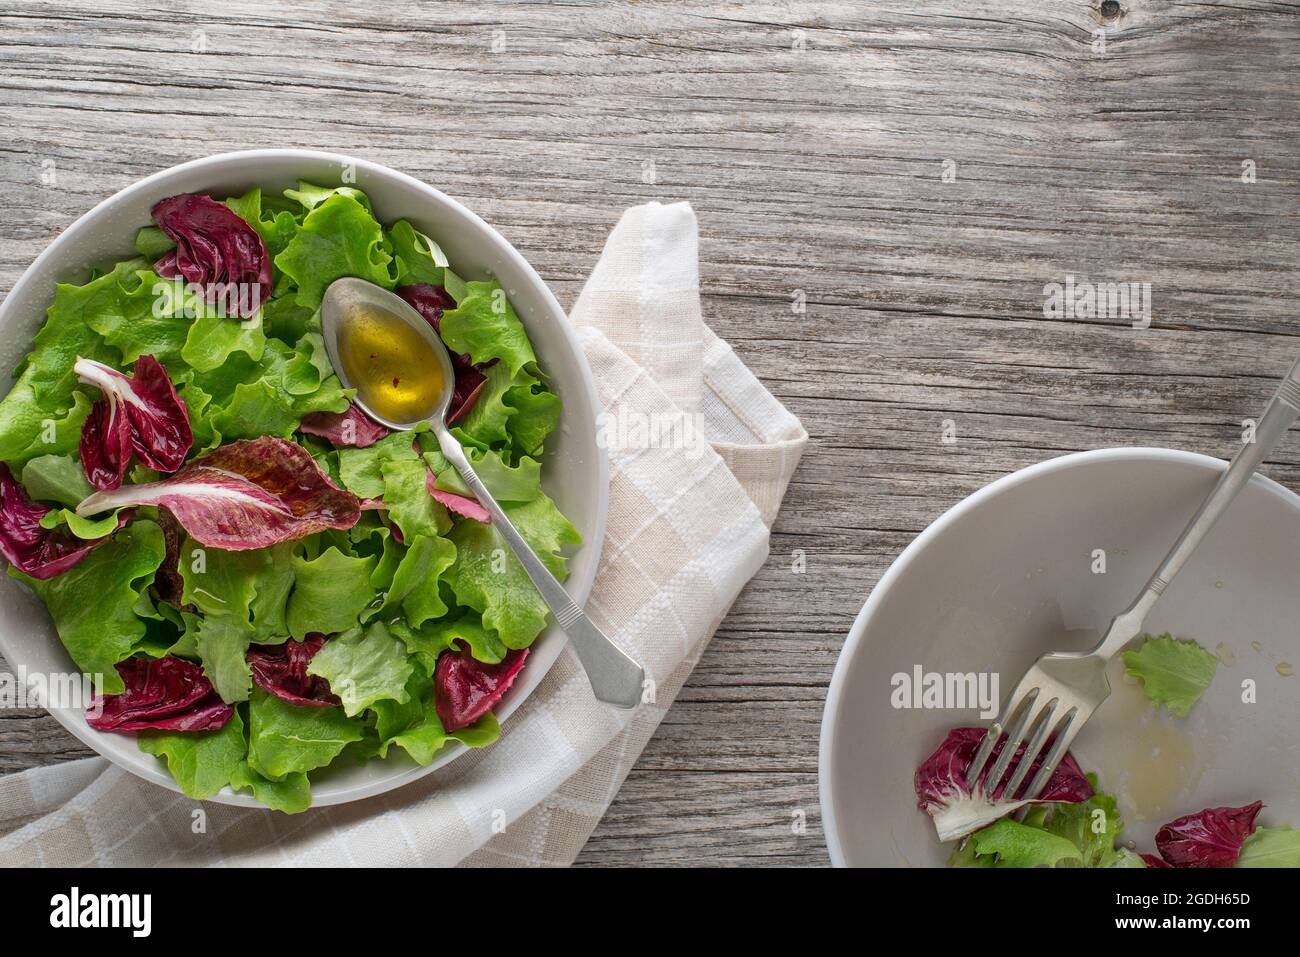 Healthy red and green lettuce salad meals on wooden table background. Eating fresh radicchio and young lettuce with dressing sauce Stock Photo